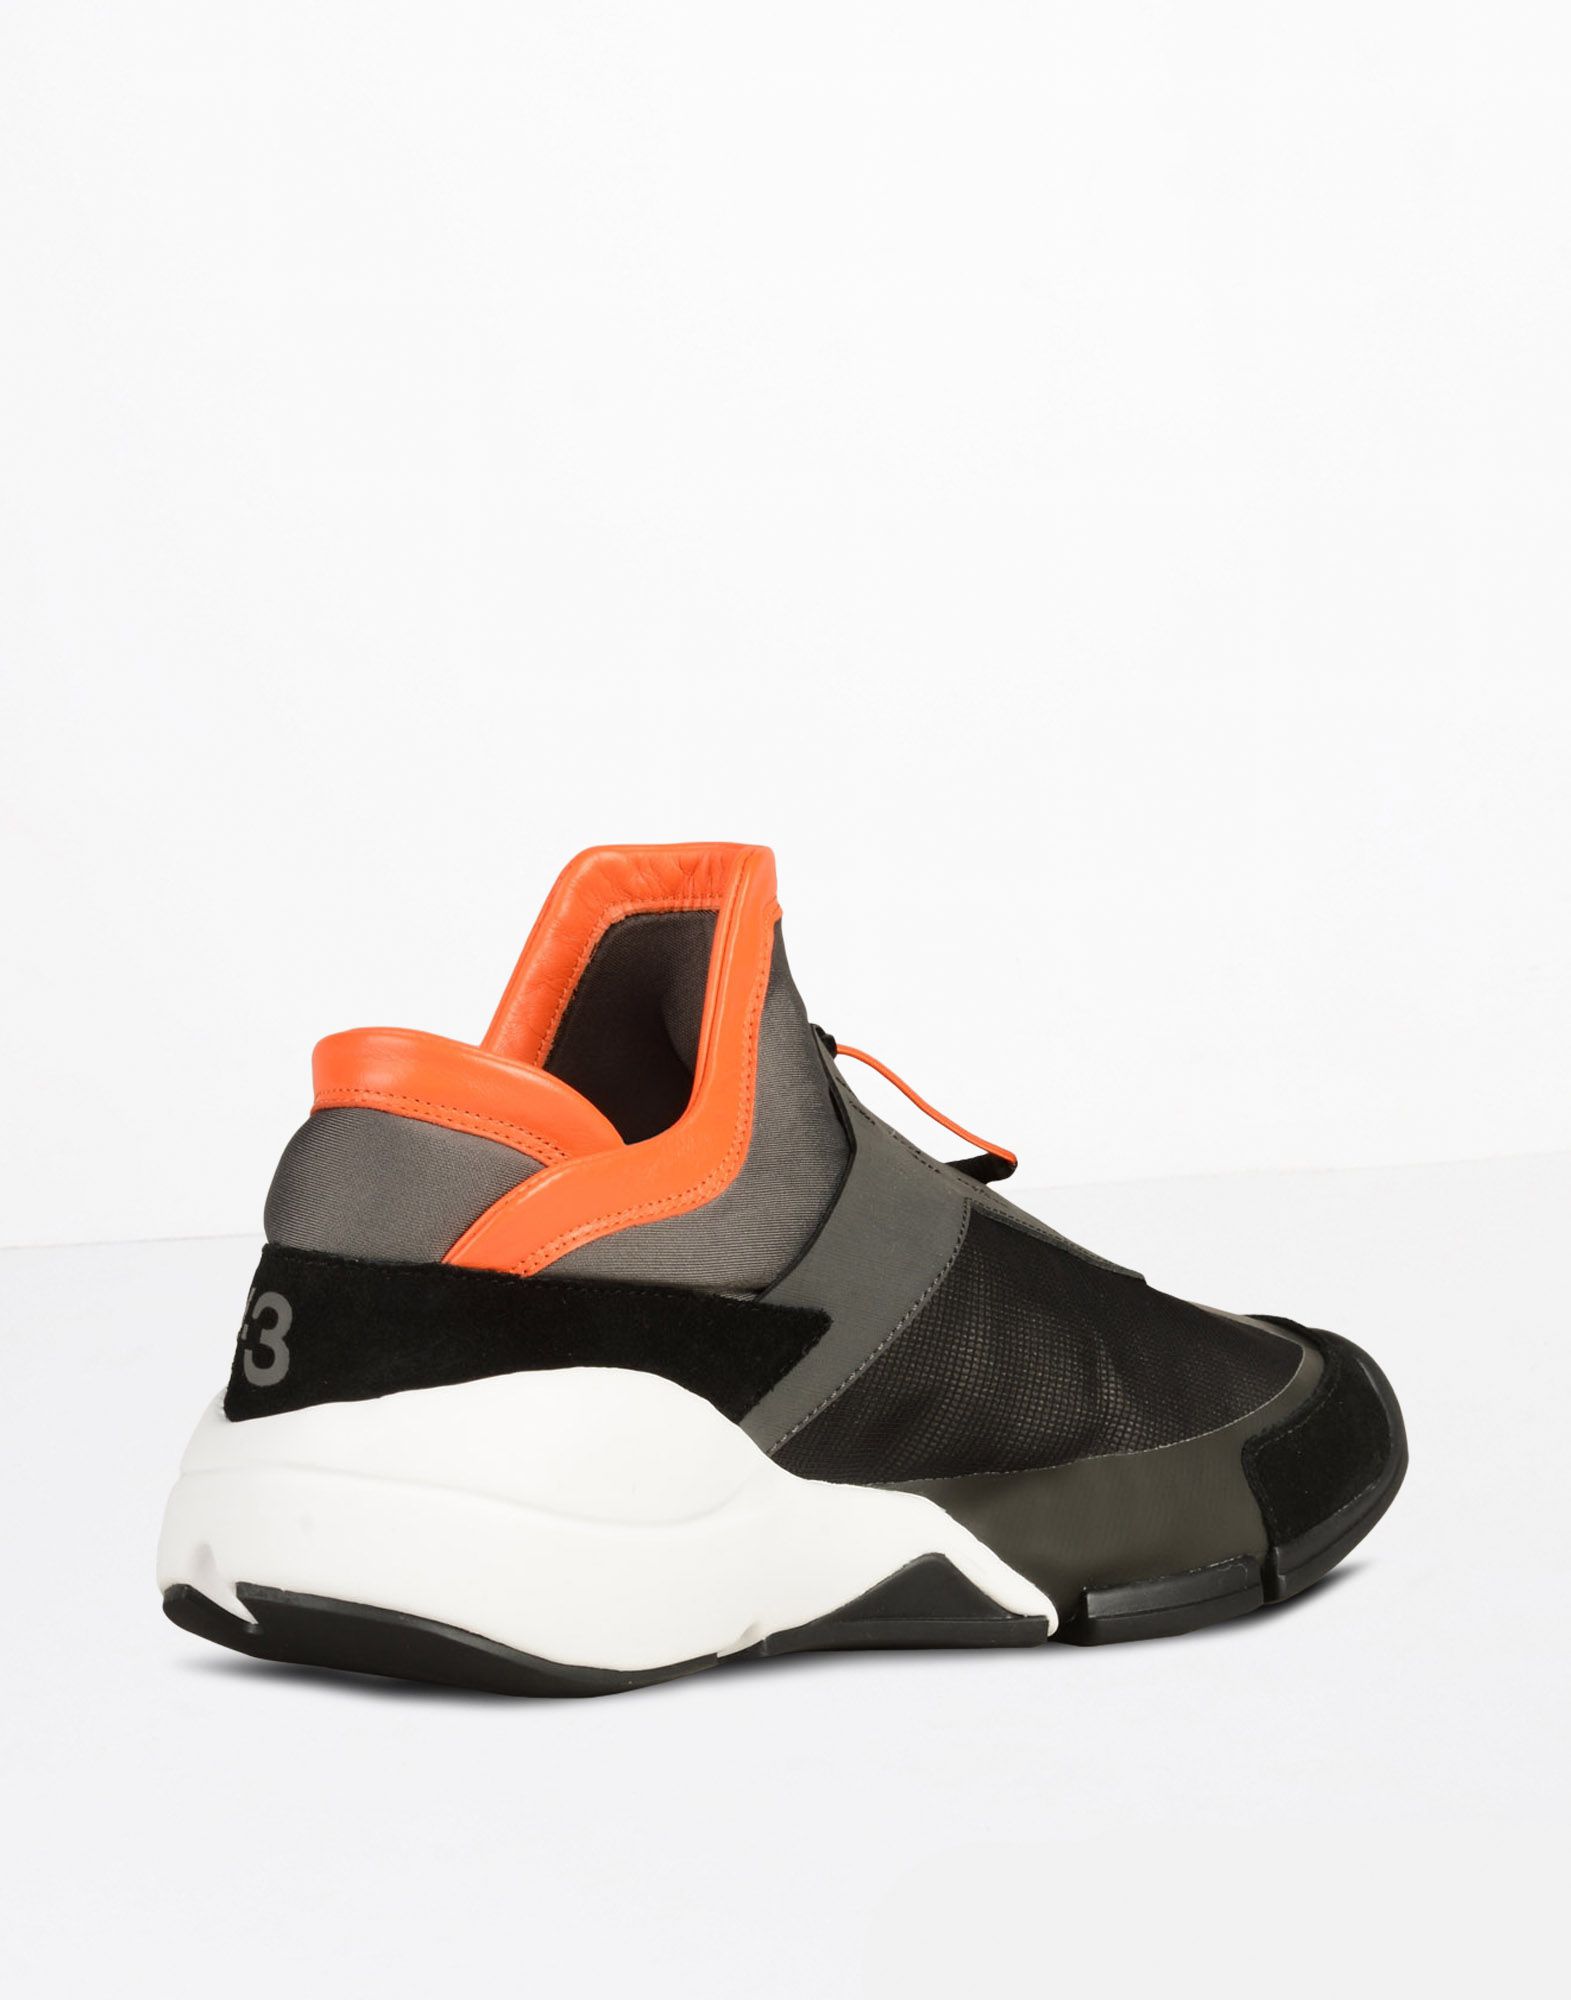 Y 3 FUTURE LOW for Men | Adidas Y-3 Official Store